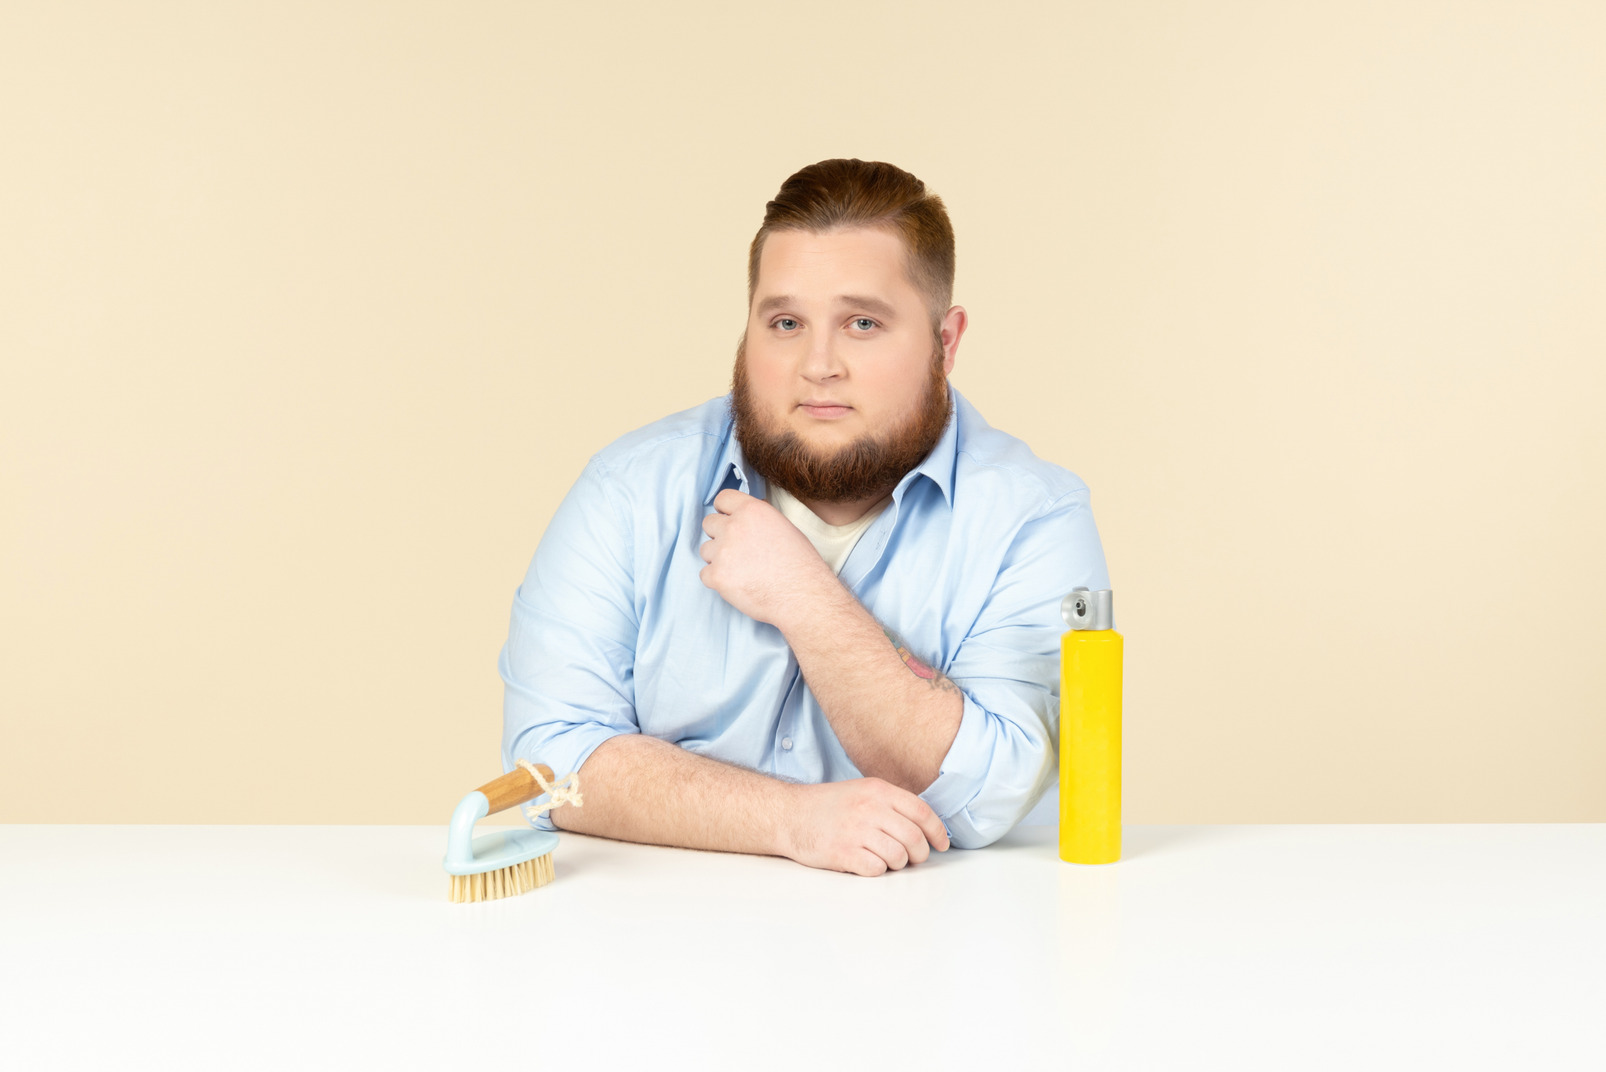 Serious looking young overweight man sitting at the table with cleaning spray and brush on it